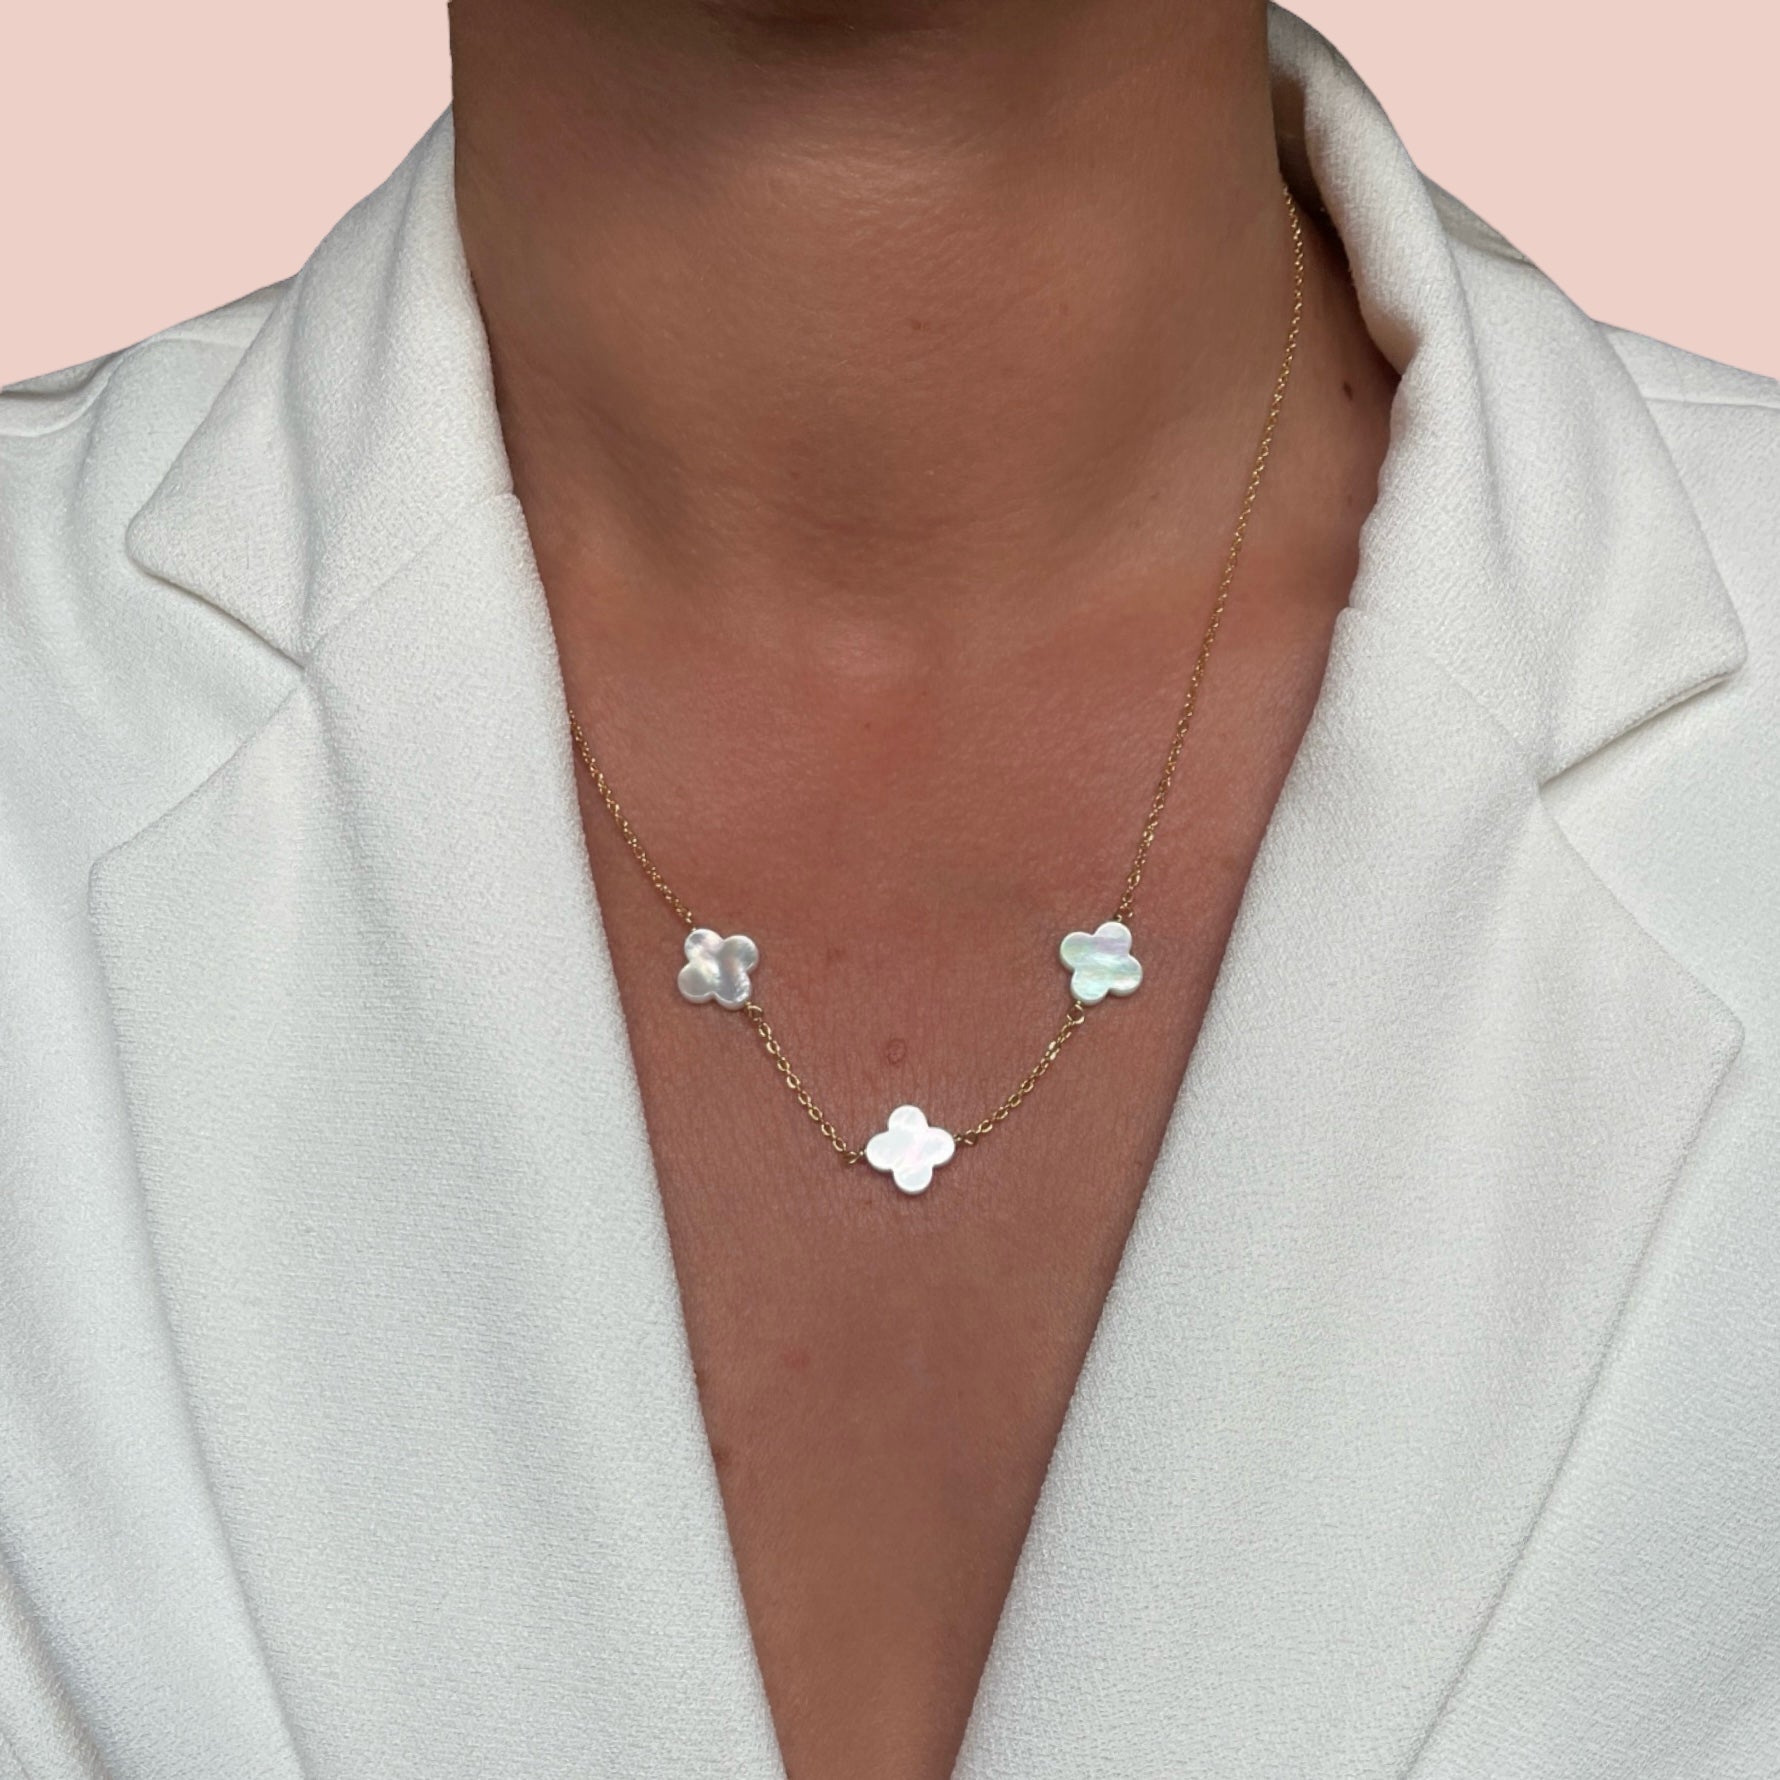 Gold-plated “White mother-of-pearl clovers” necklace